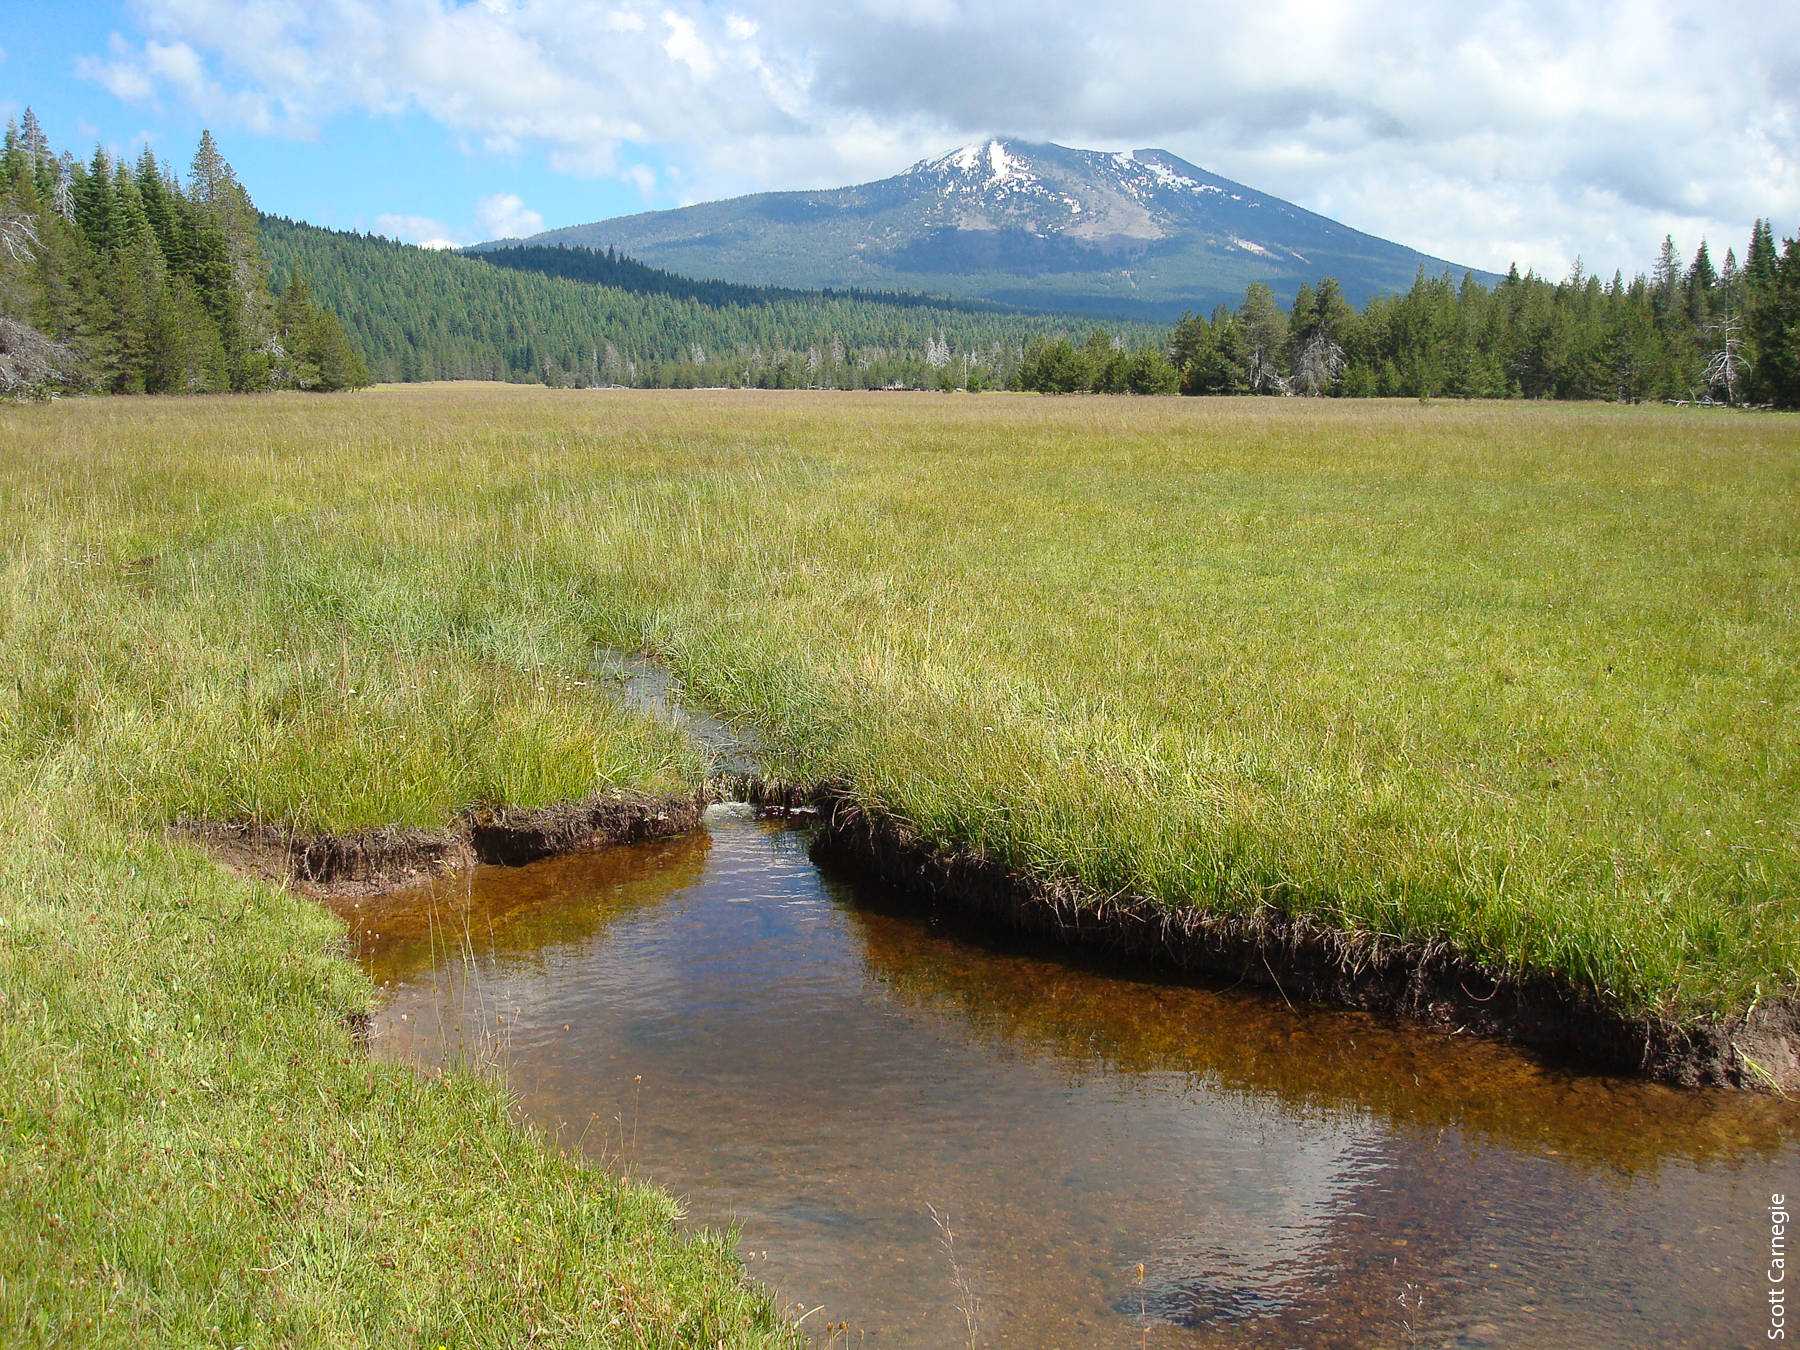 Eroding channel within the meadow.